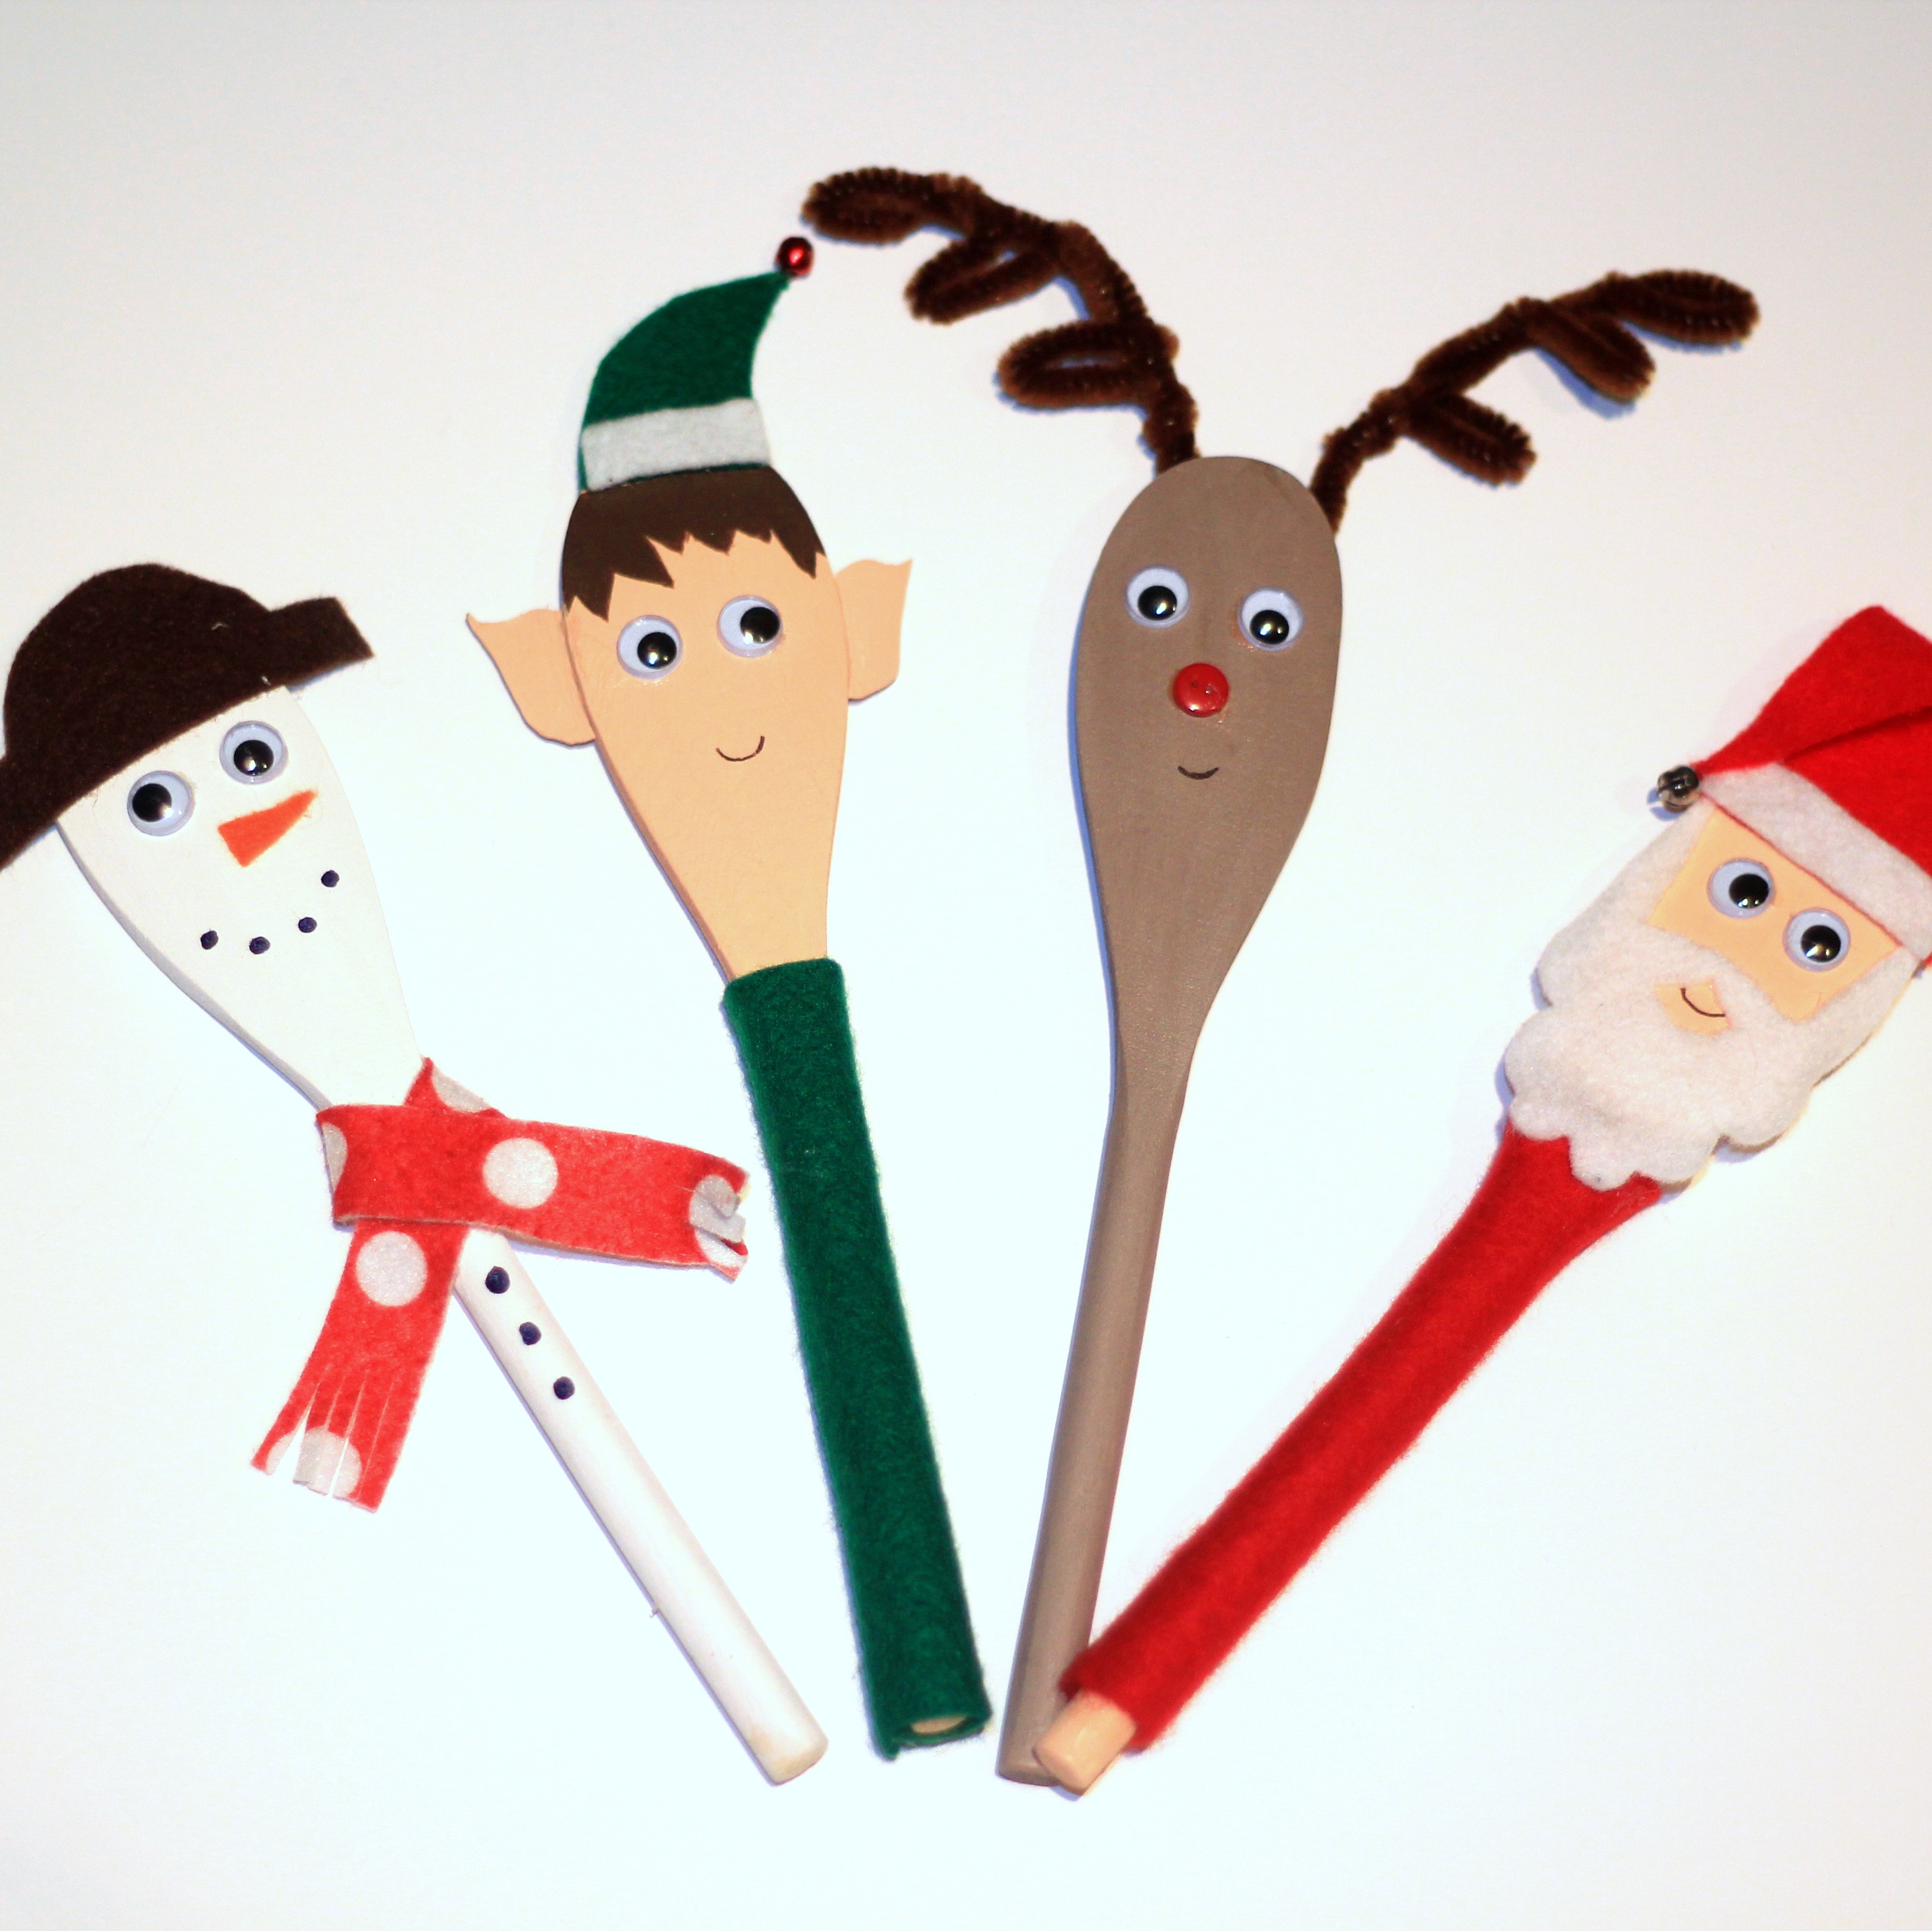 Christmas Craft Projects by Little Button Diaries - quick festive crafts